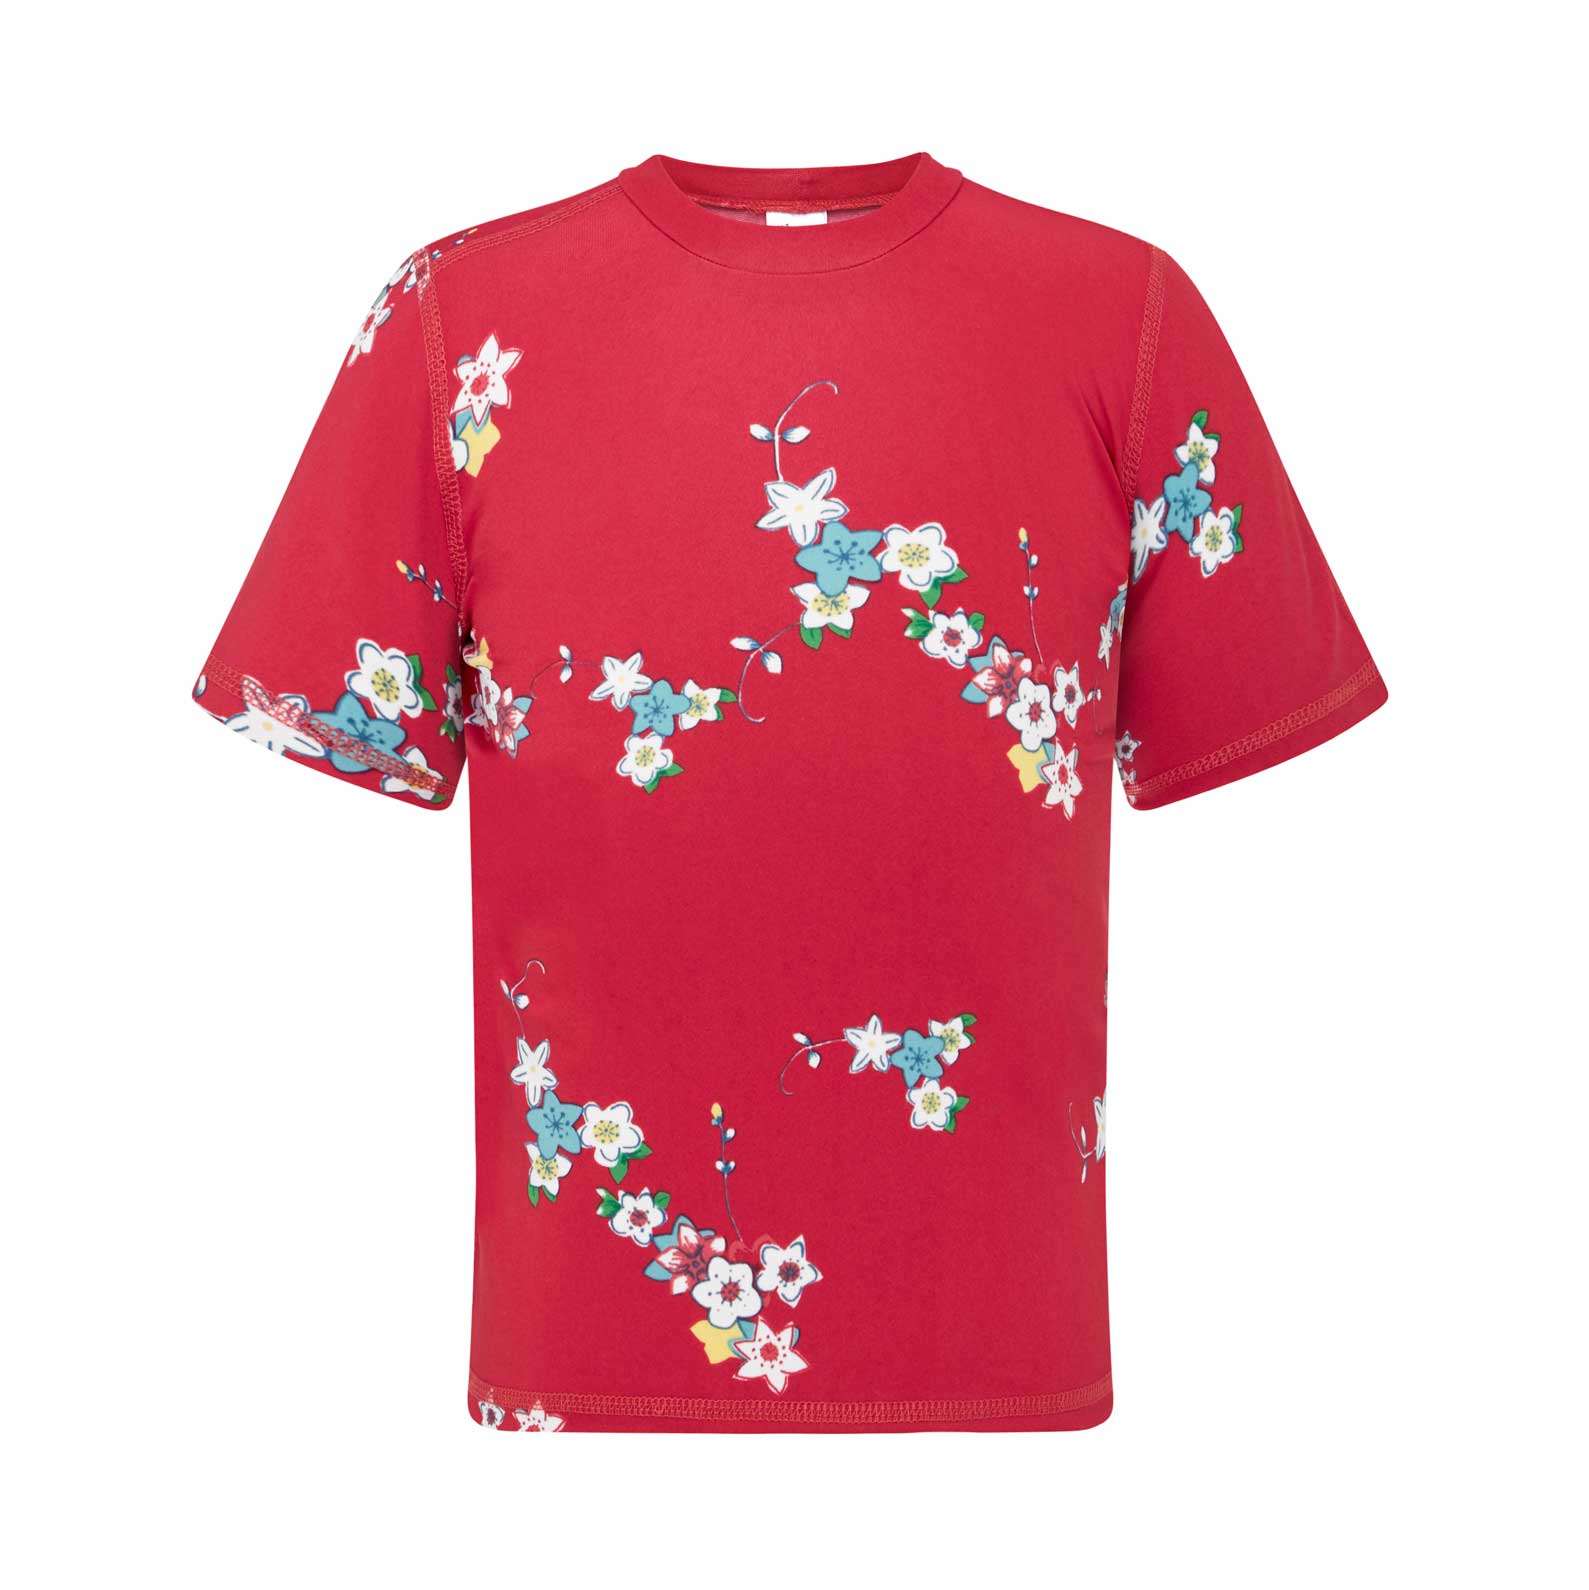 SHORT SLEEVED RASHIE IN Red Blossom - The Bathers Company